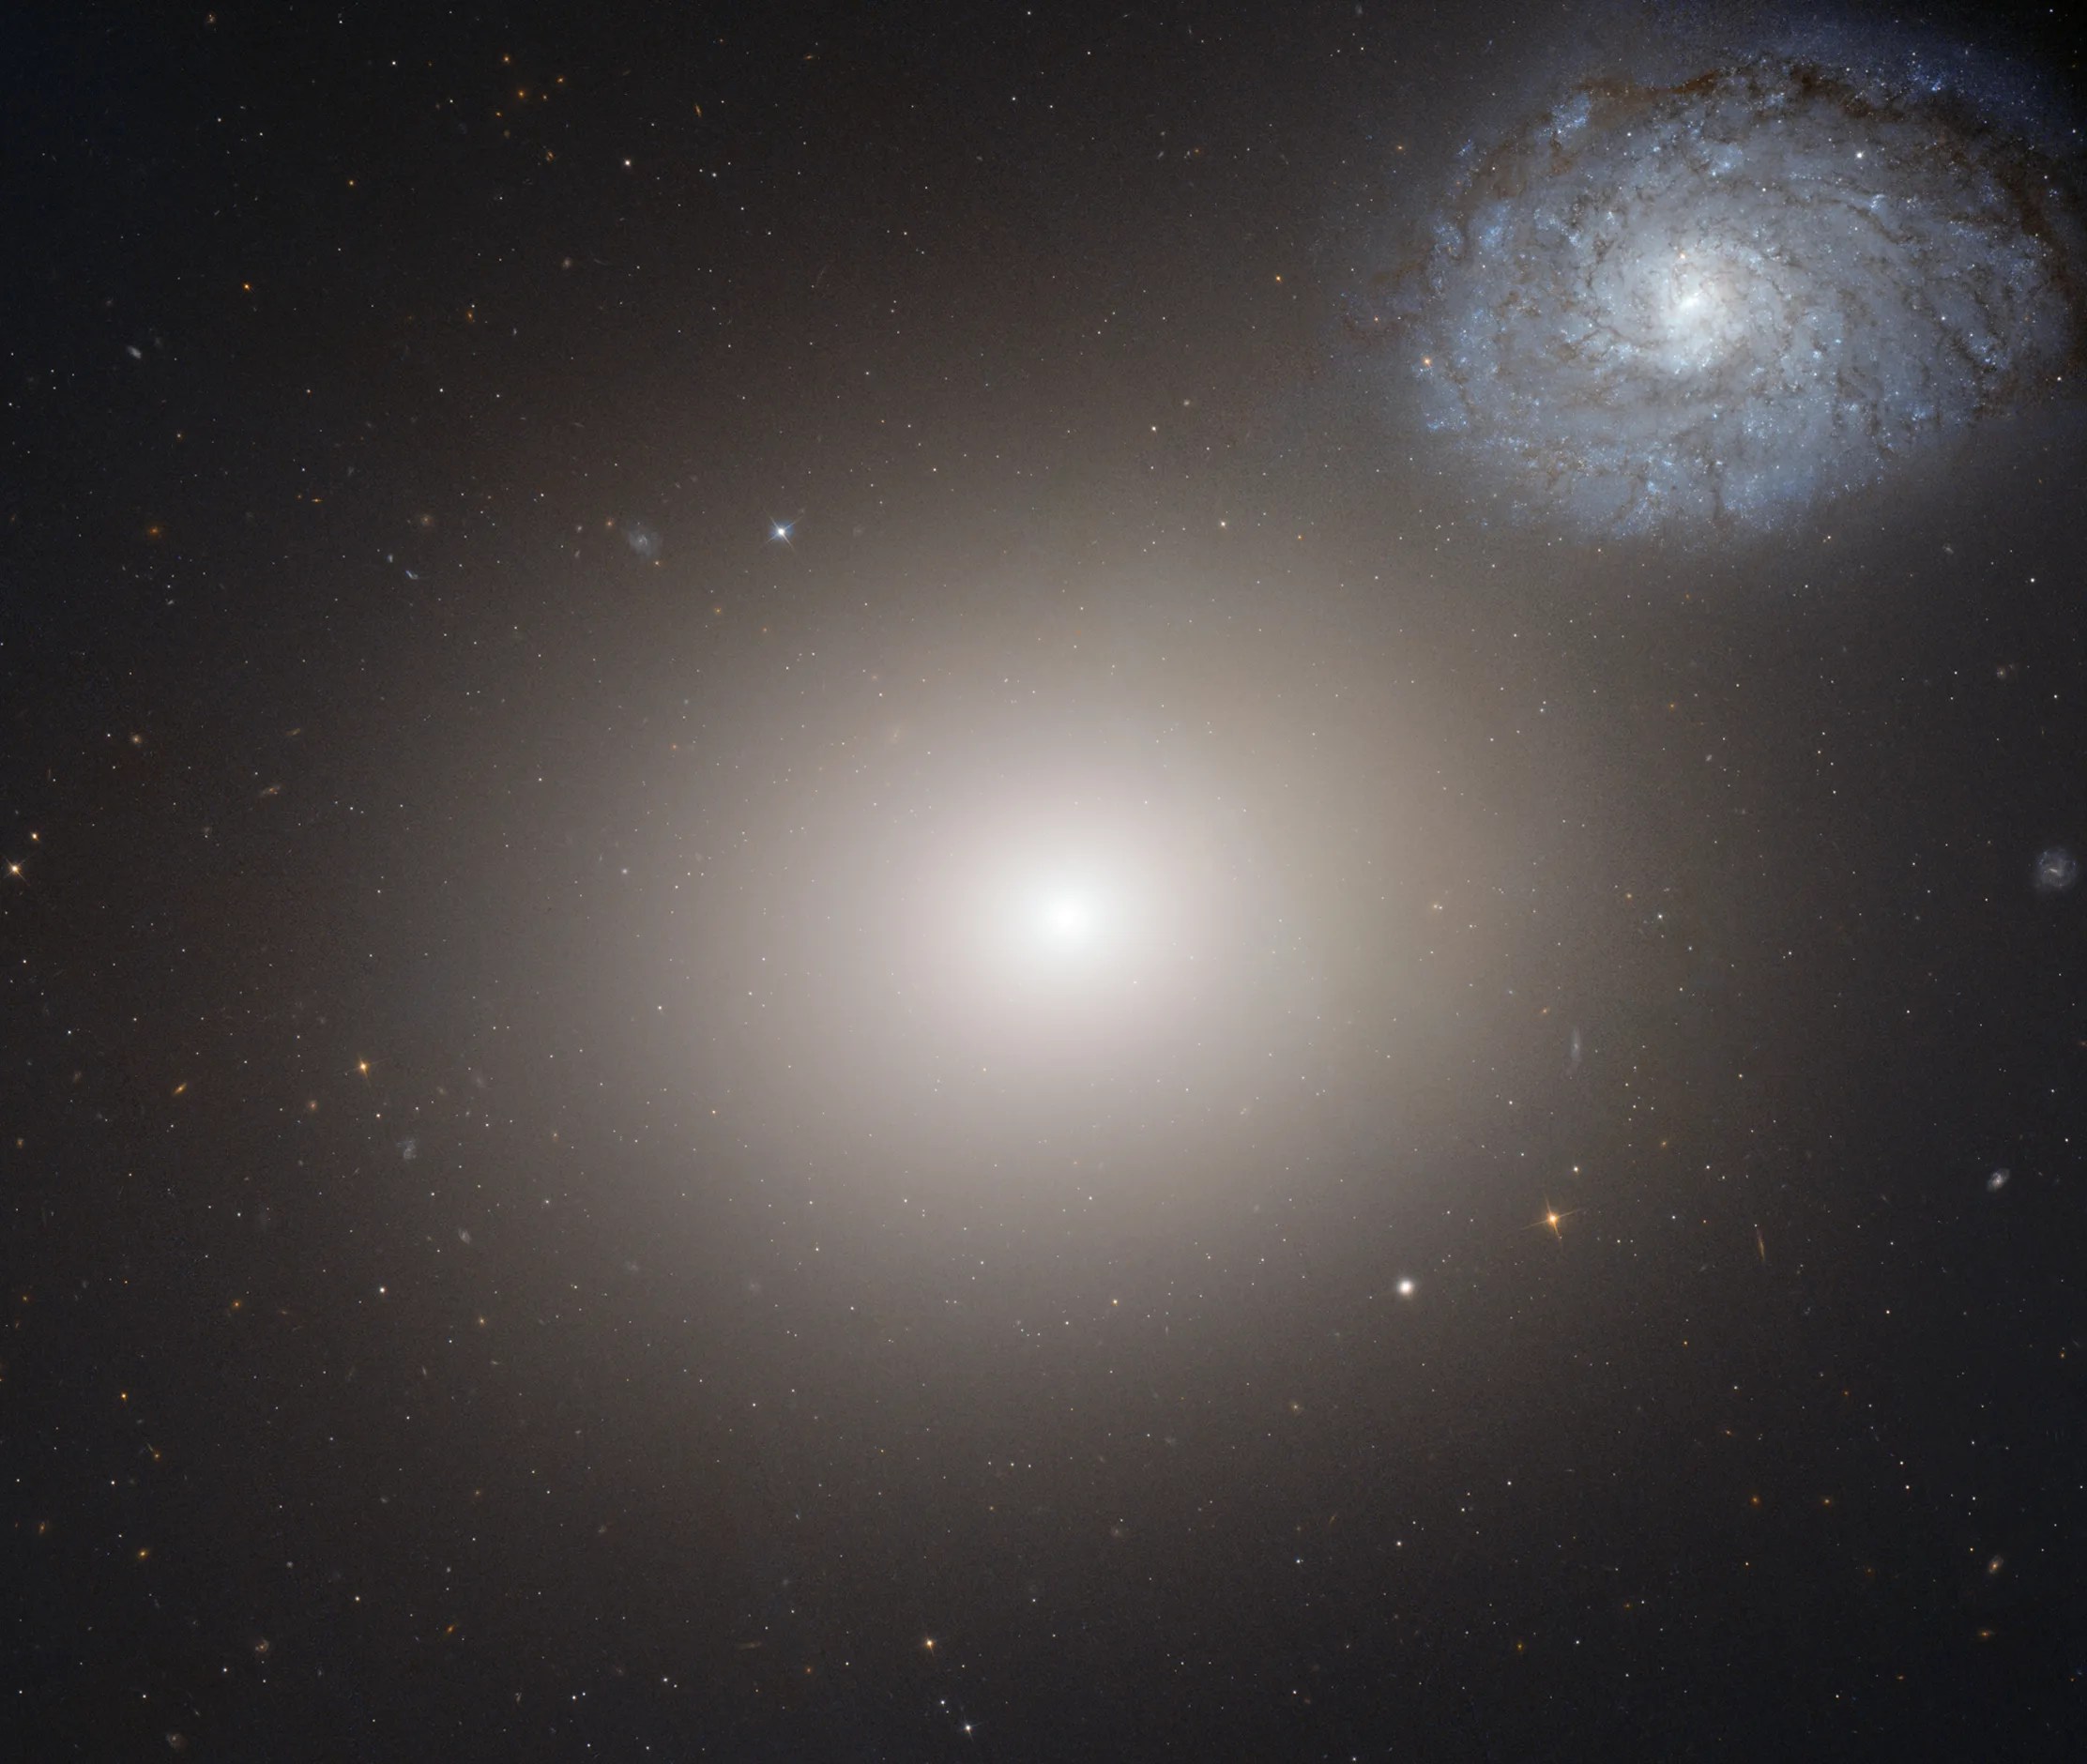 A hazy white-yellow light shines in the center of the image against black space, dotted with faint, distant stars. In the top right of the image is a spiral galaxy with many arms as seen from overhead. It is light blue.